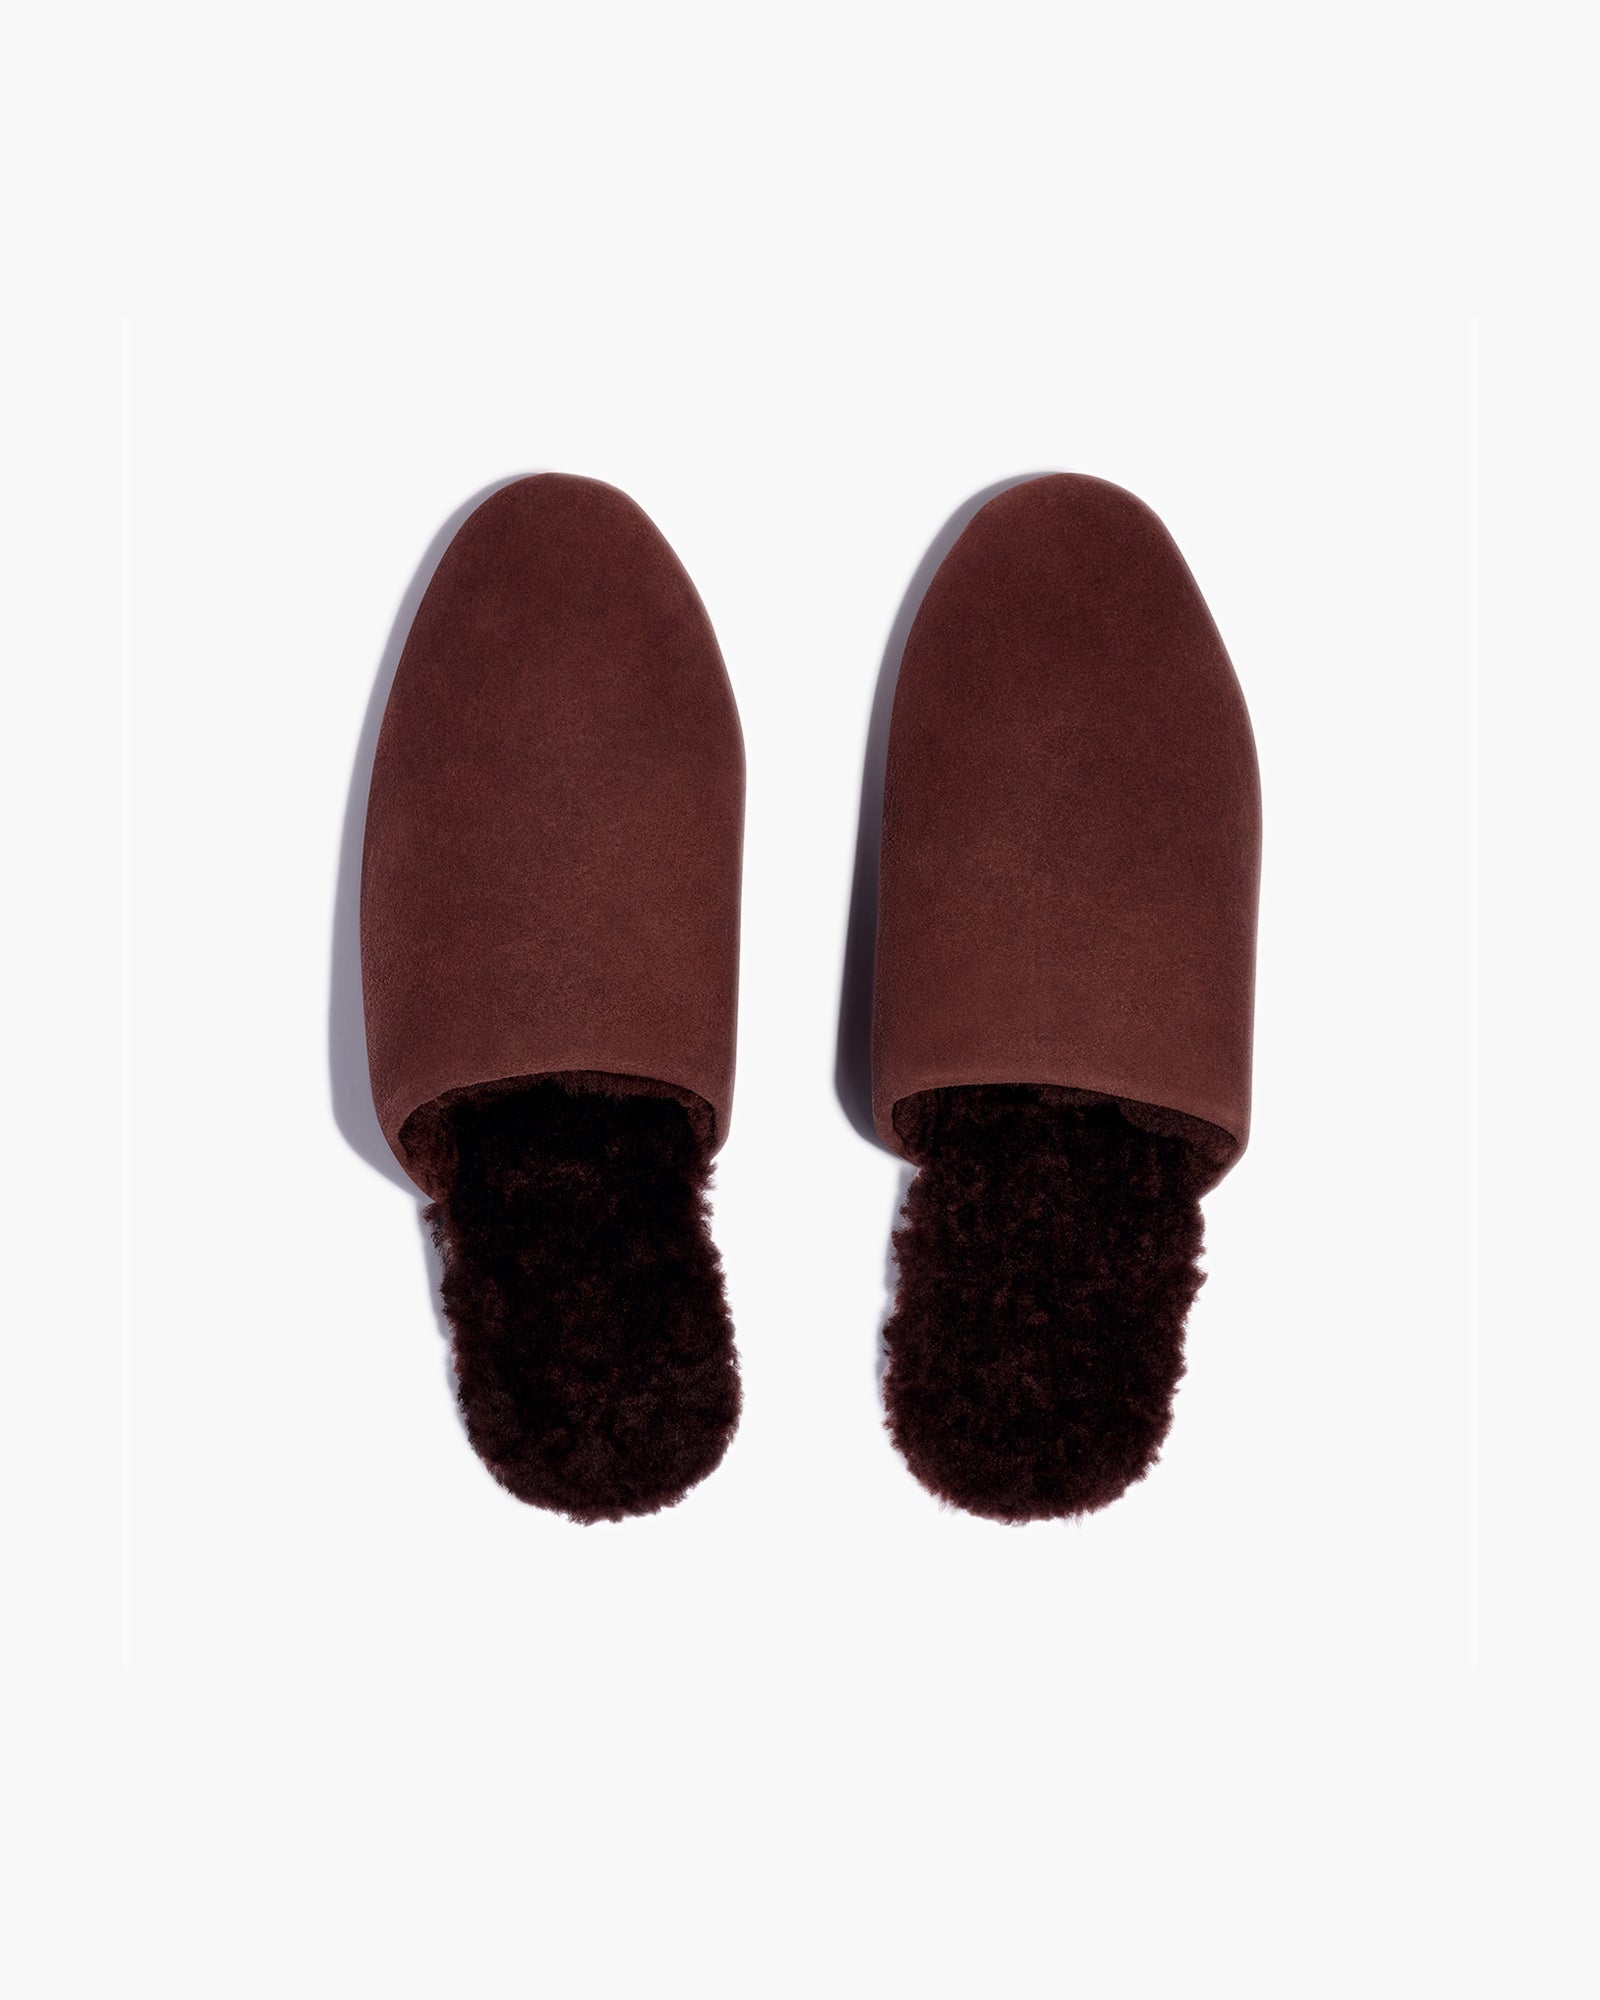 Chocolate Women's's's's's's's's's's's's's's's's's's's's's's TKEES Ines Shearling Slides | WLJYFA724